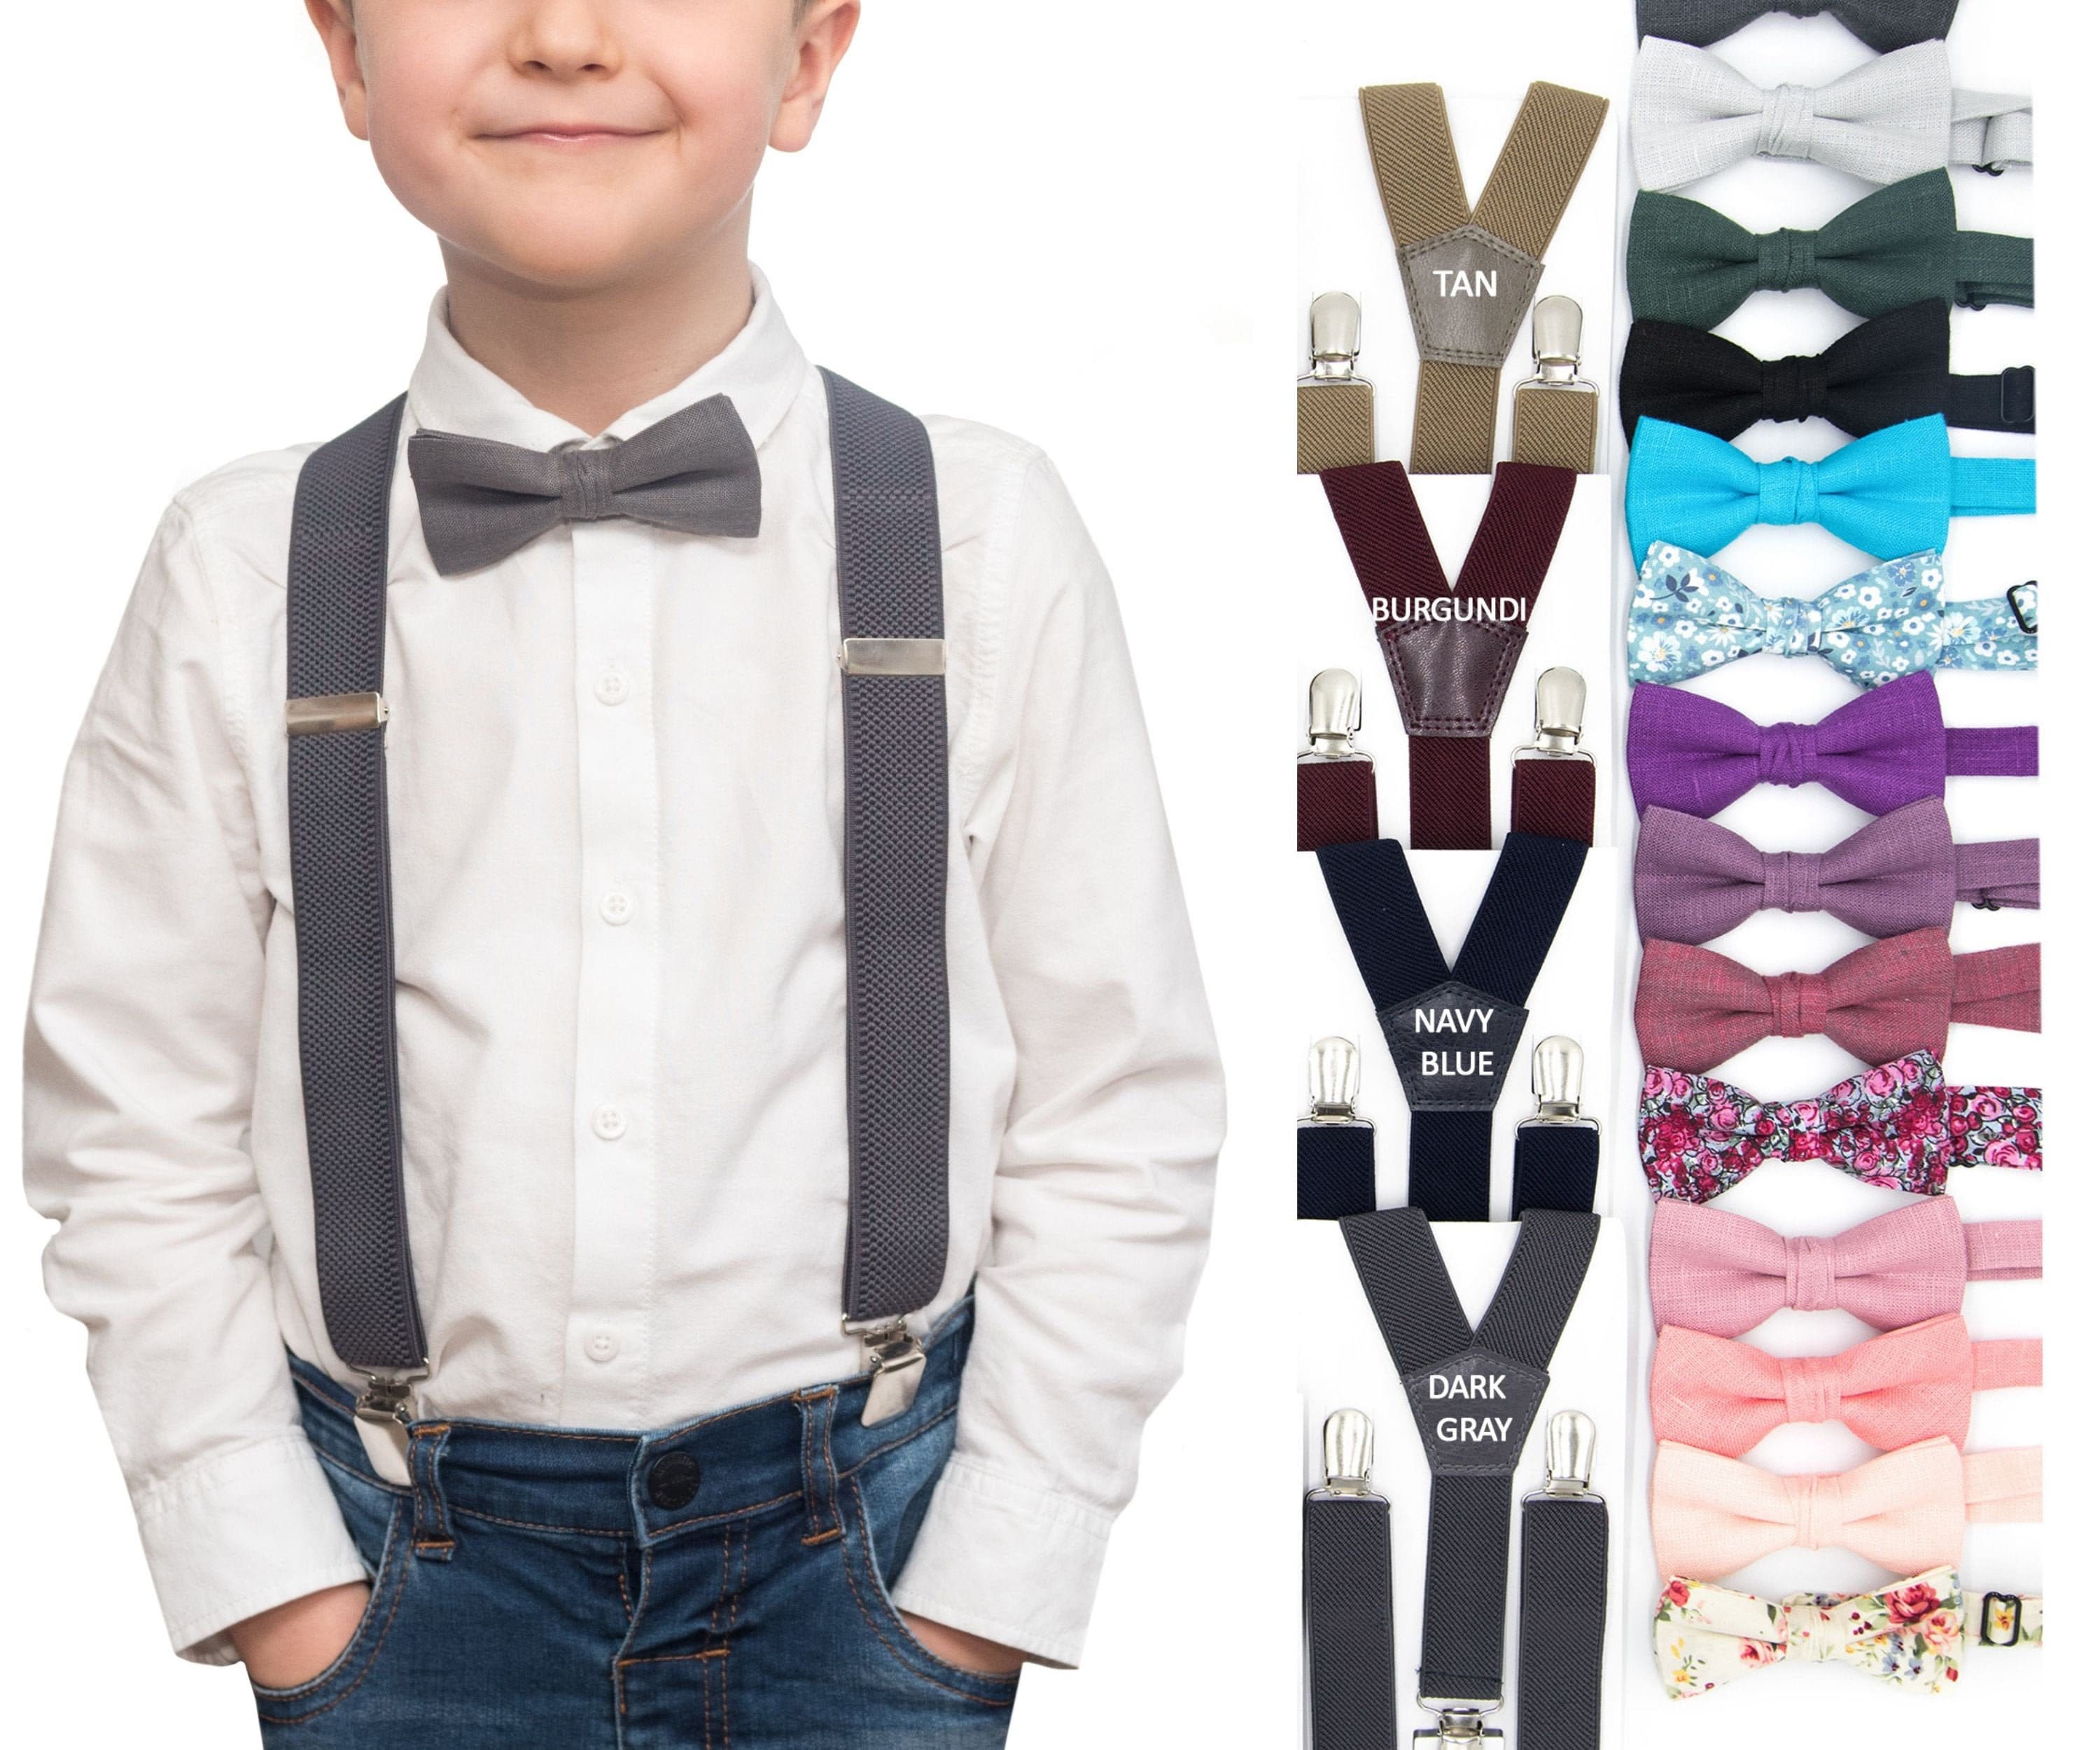 Ring Bearer Outfit Wedding Bowtie Suspender Set Blush Pink Bow Tie & Light Gray Suspenders